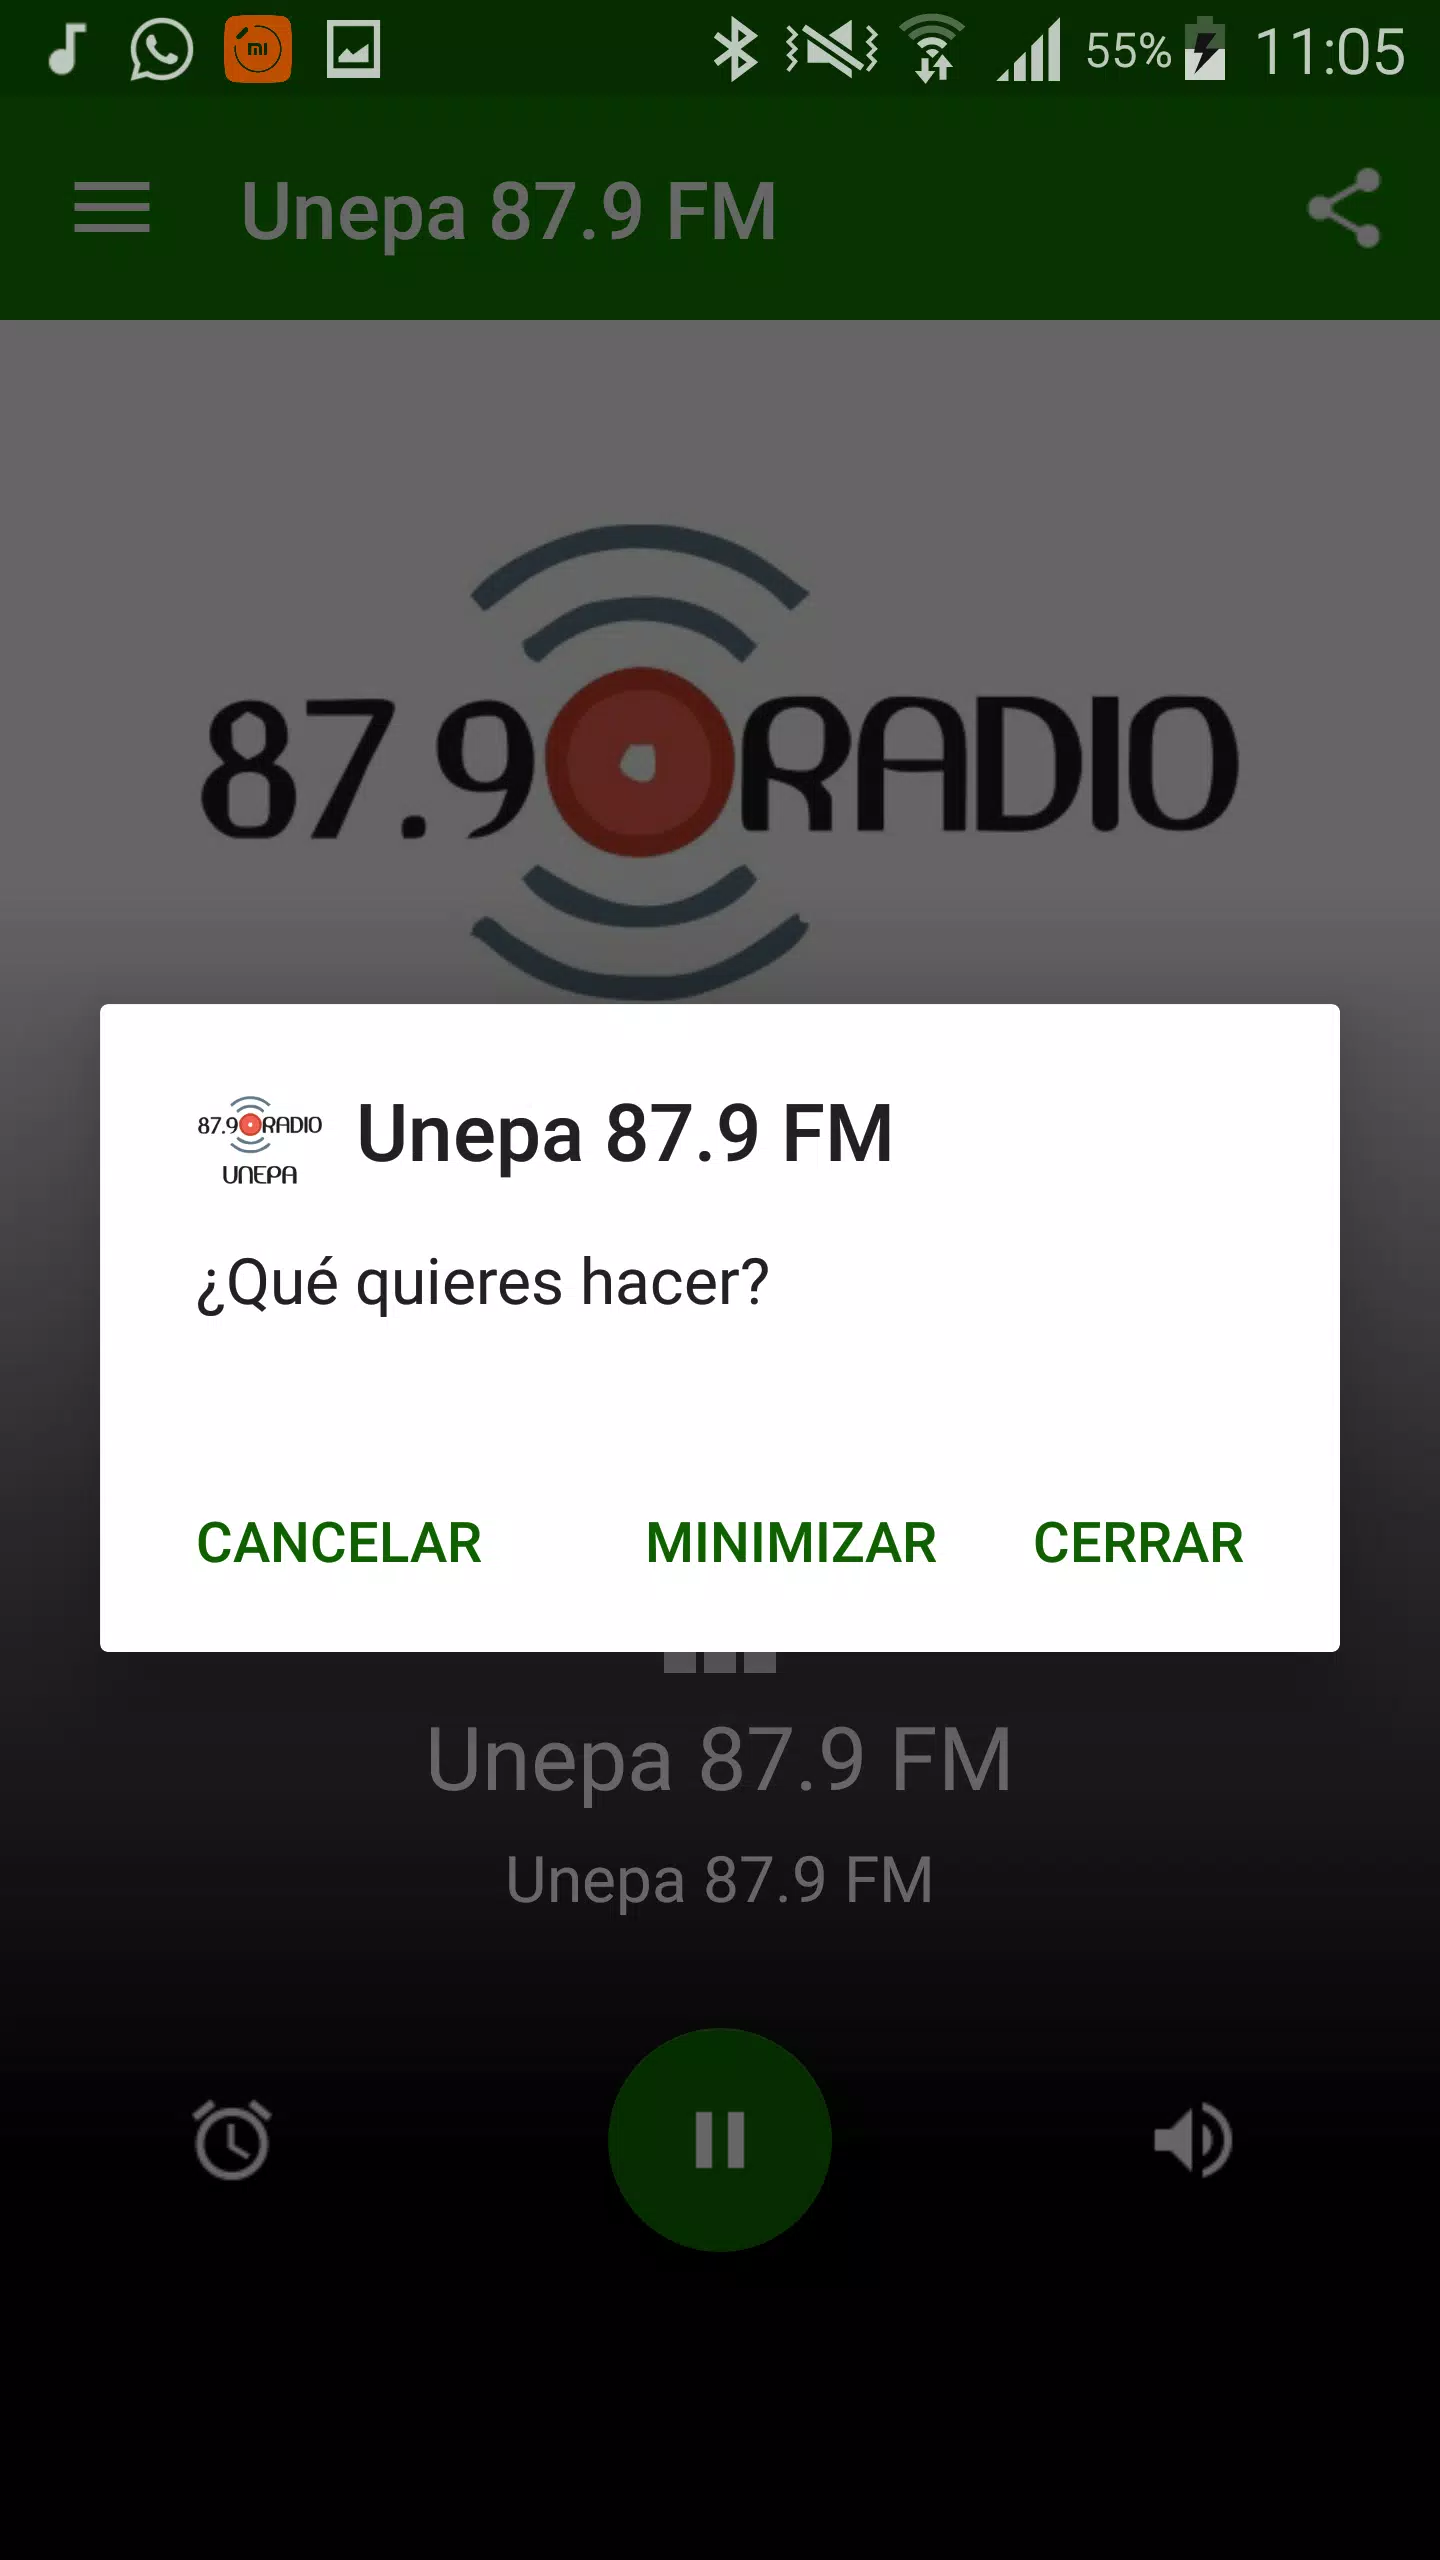 Unepa 87.9 FM for Android - APK Download